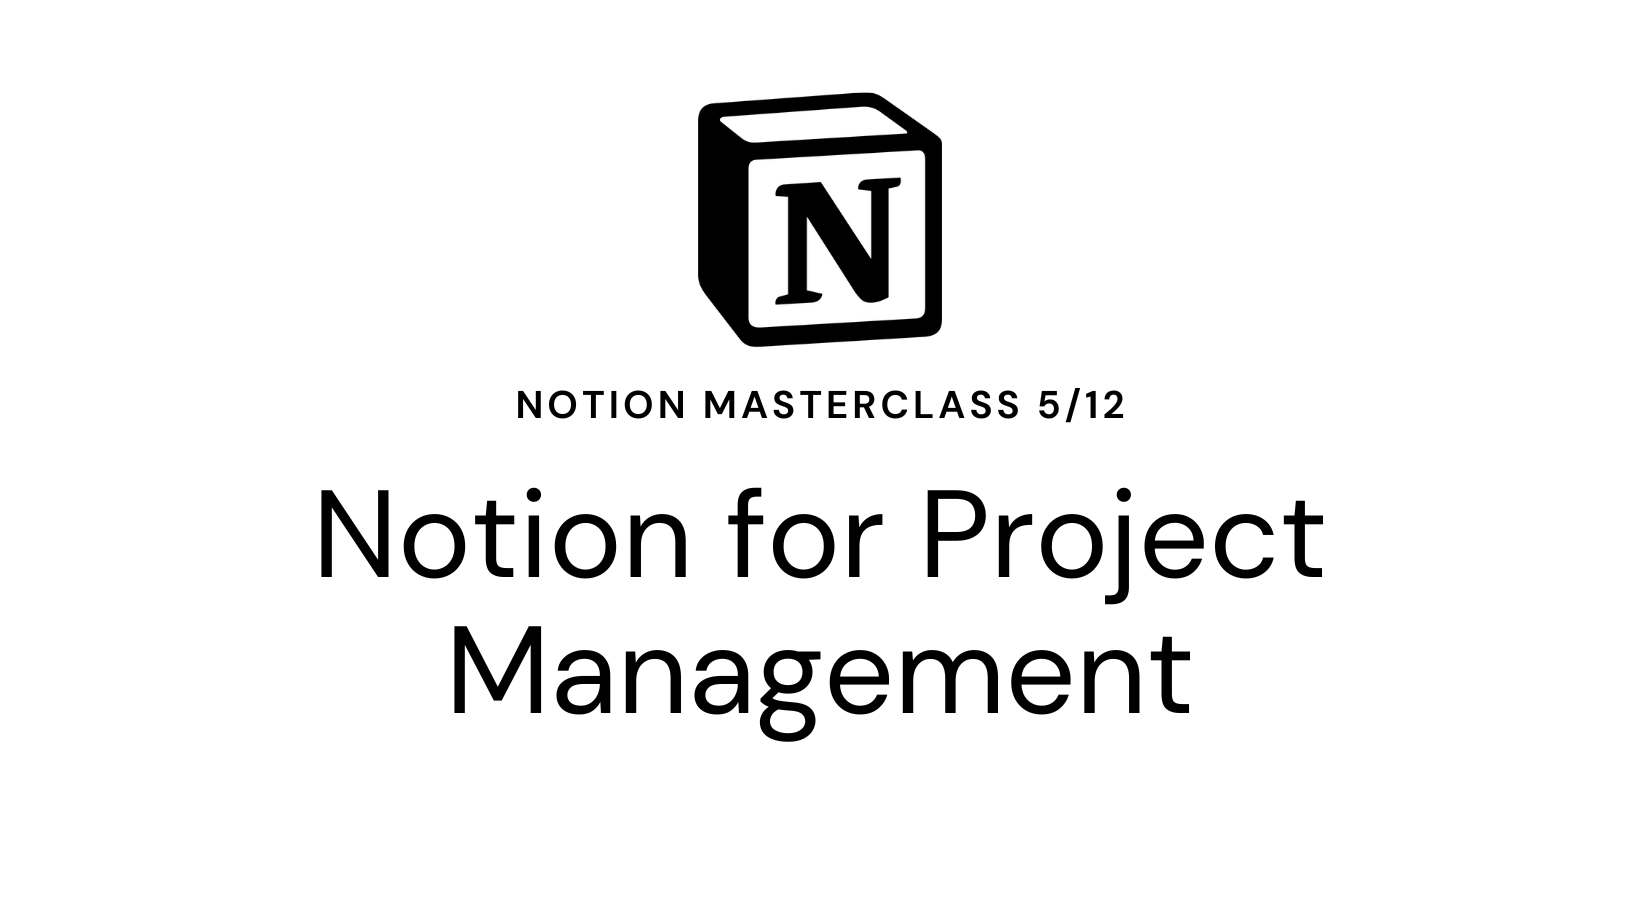 Notion Masterclass 5/12 Notion for Project Management